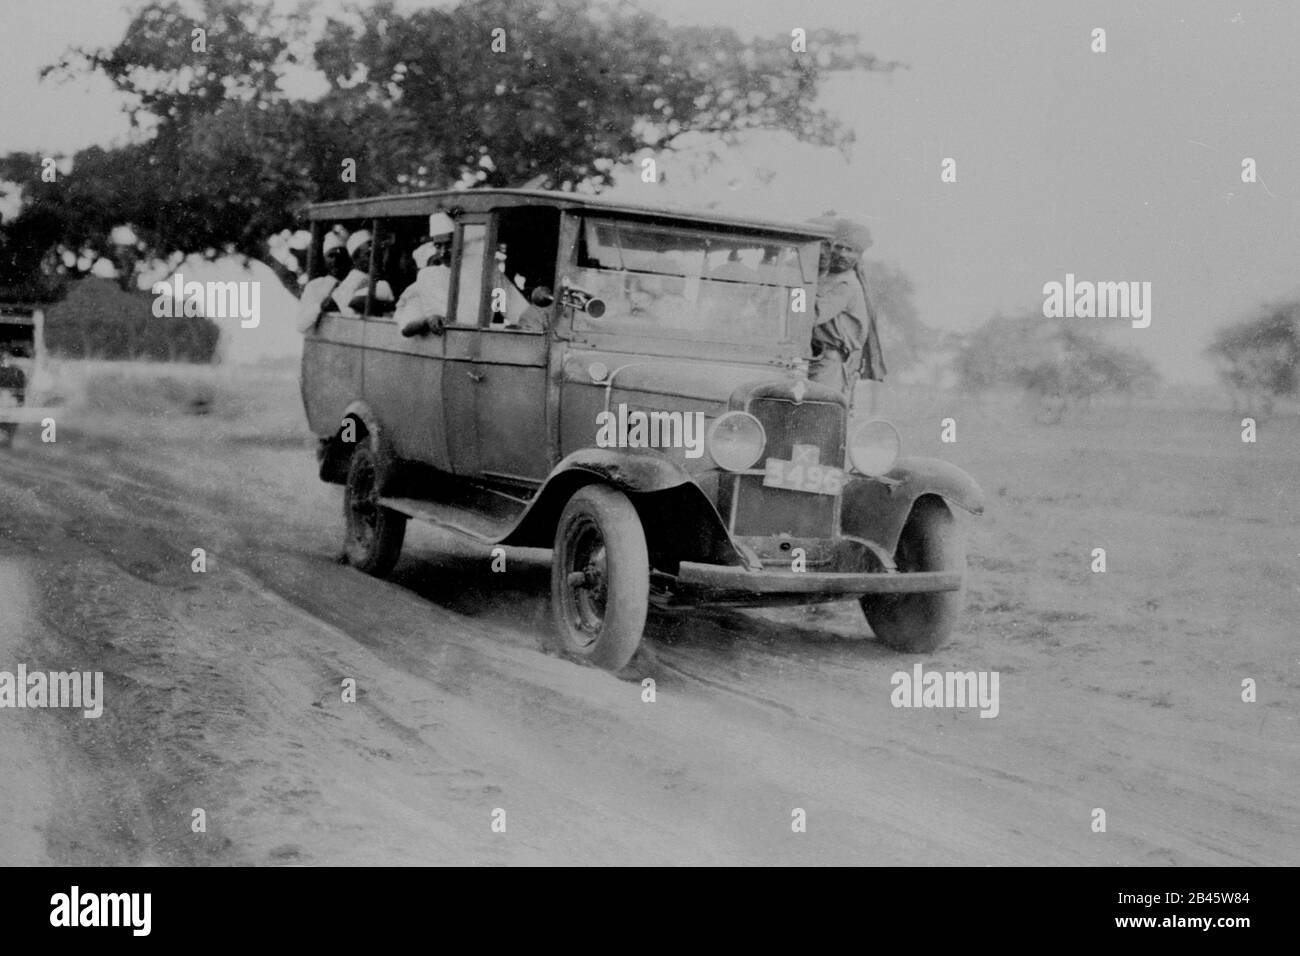 Indian freedom fighters captured by British police transported in car, India, Asia, 1930, old vintage 1900s picture Stock Photo